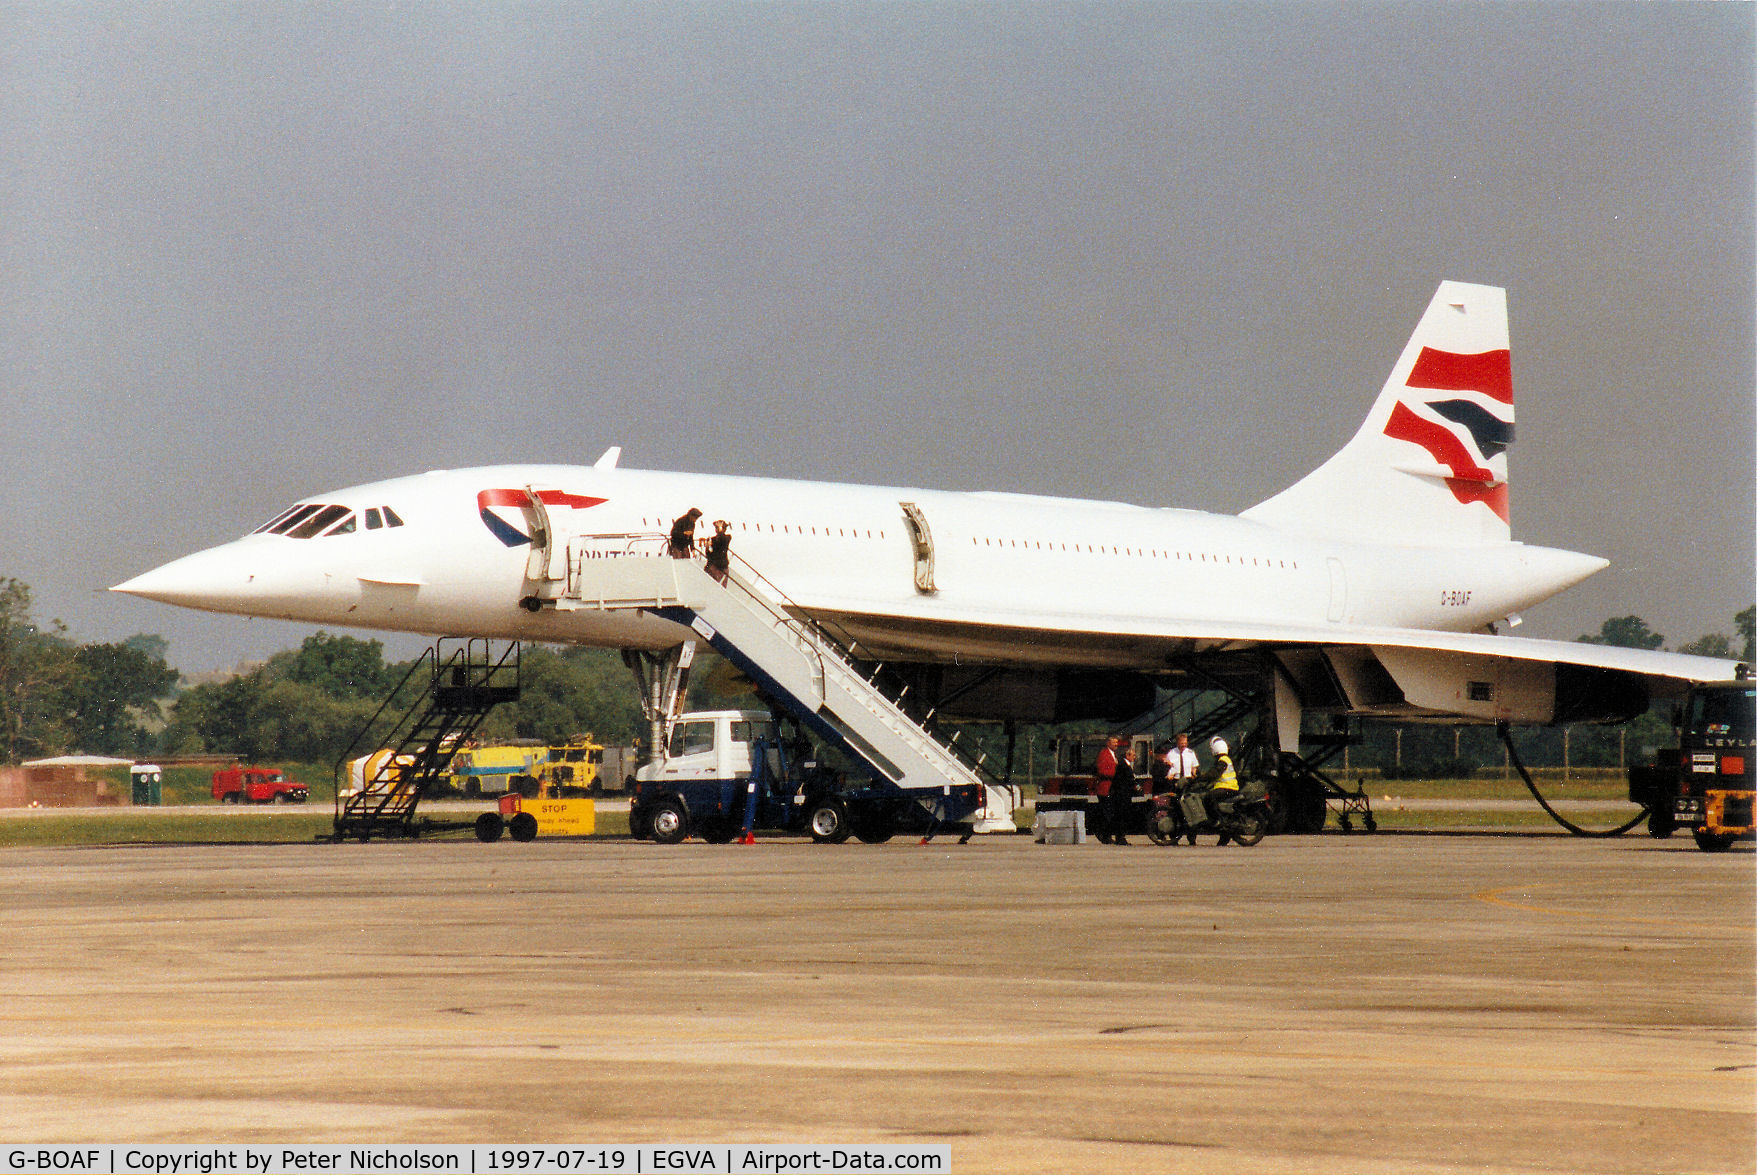 G-BOAF, 1979 Aerospatiale-BAC Concorde 1-102 C/N 100-016, Concode 102 of British Airways on display at the 1997 Intnl Air Tattoo at RAF Fairford.